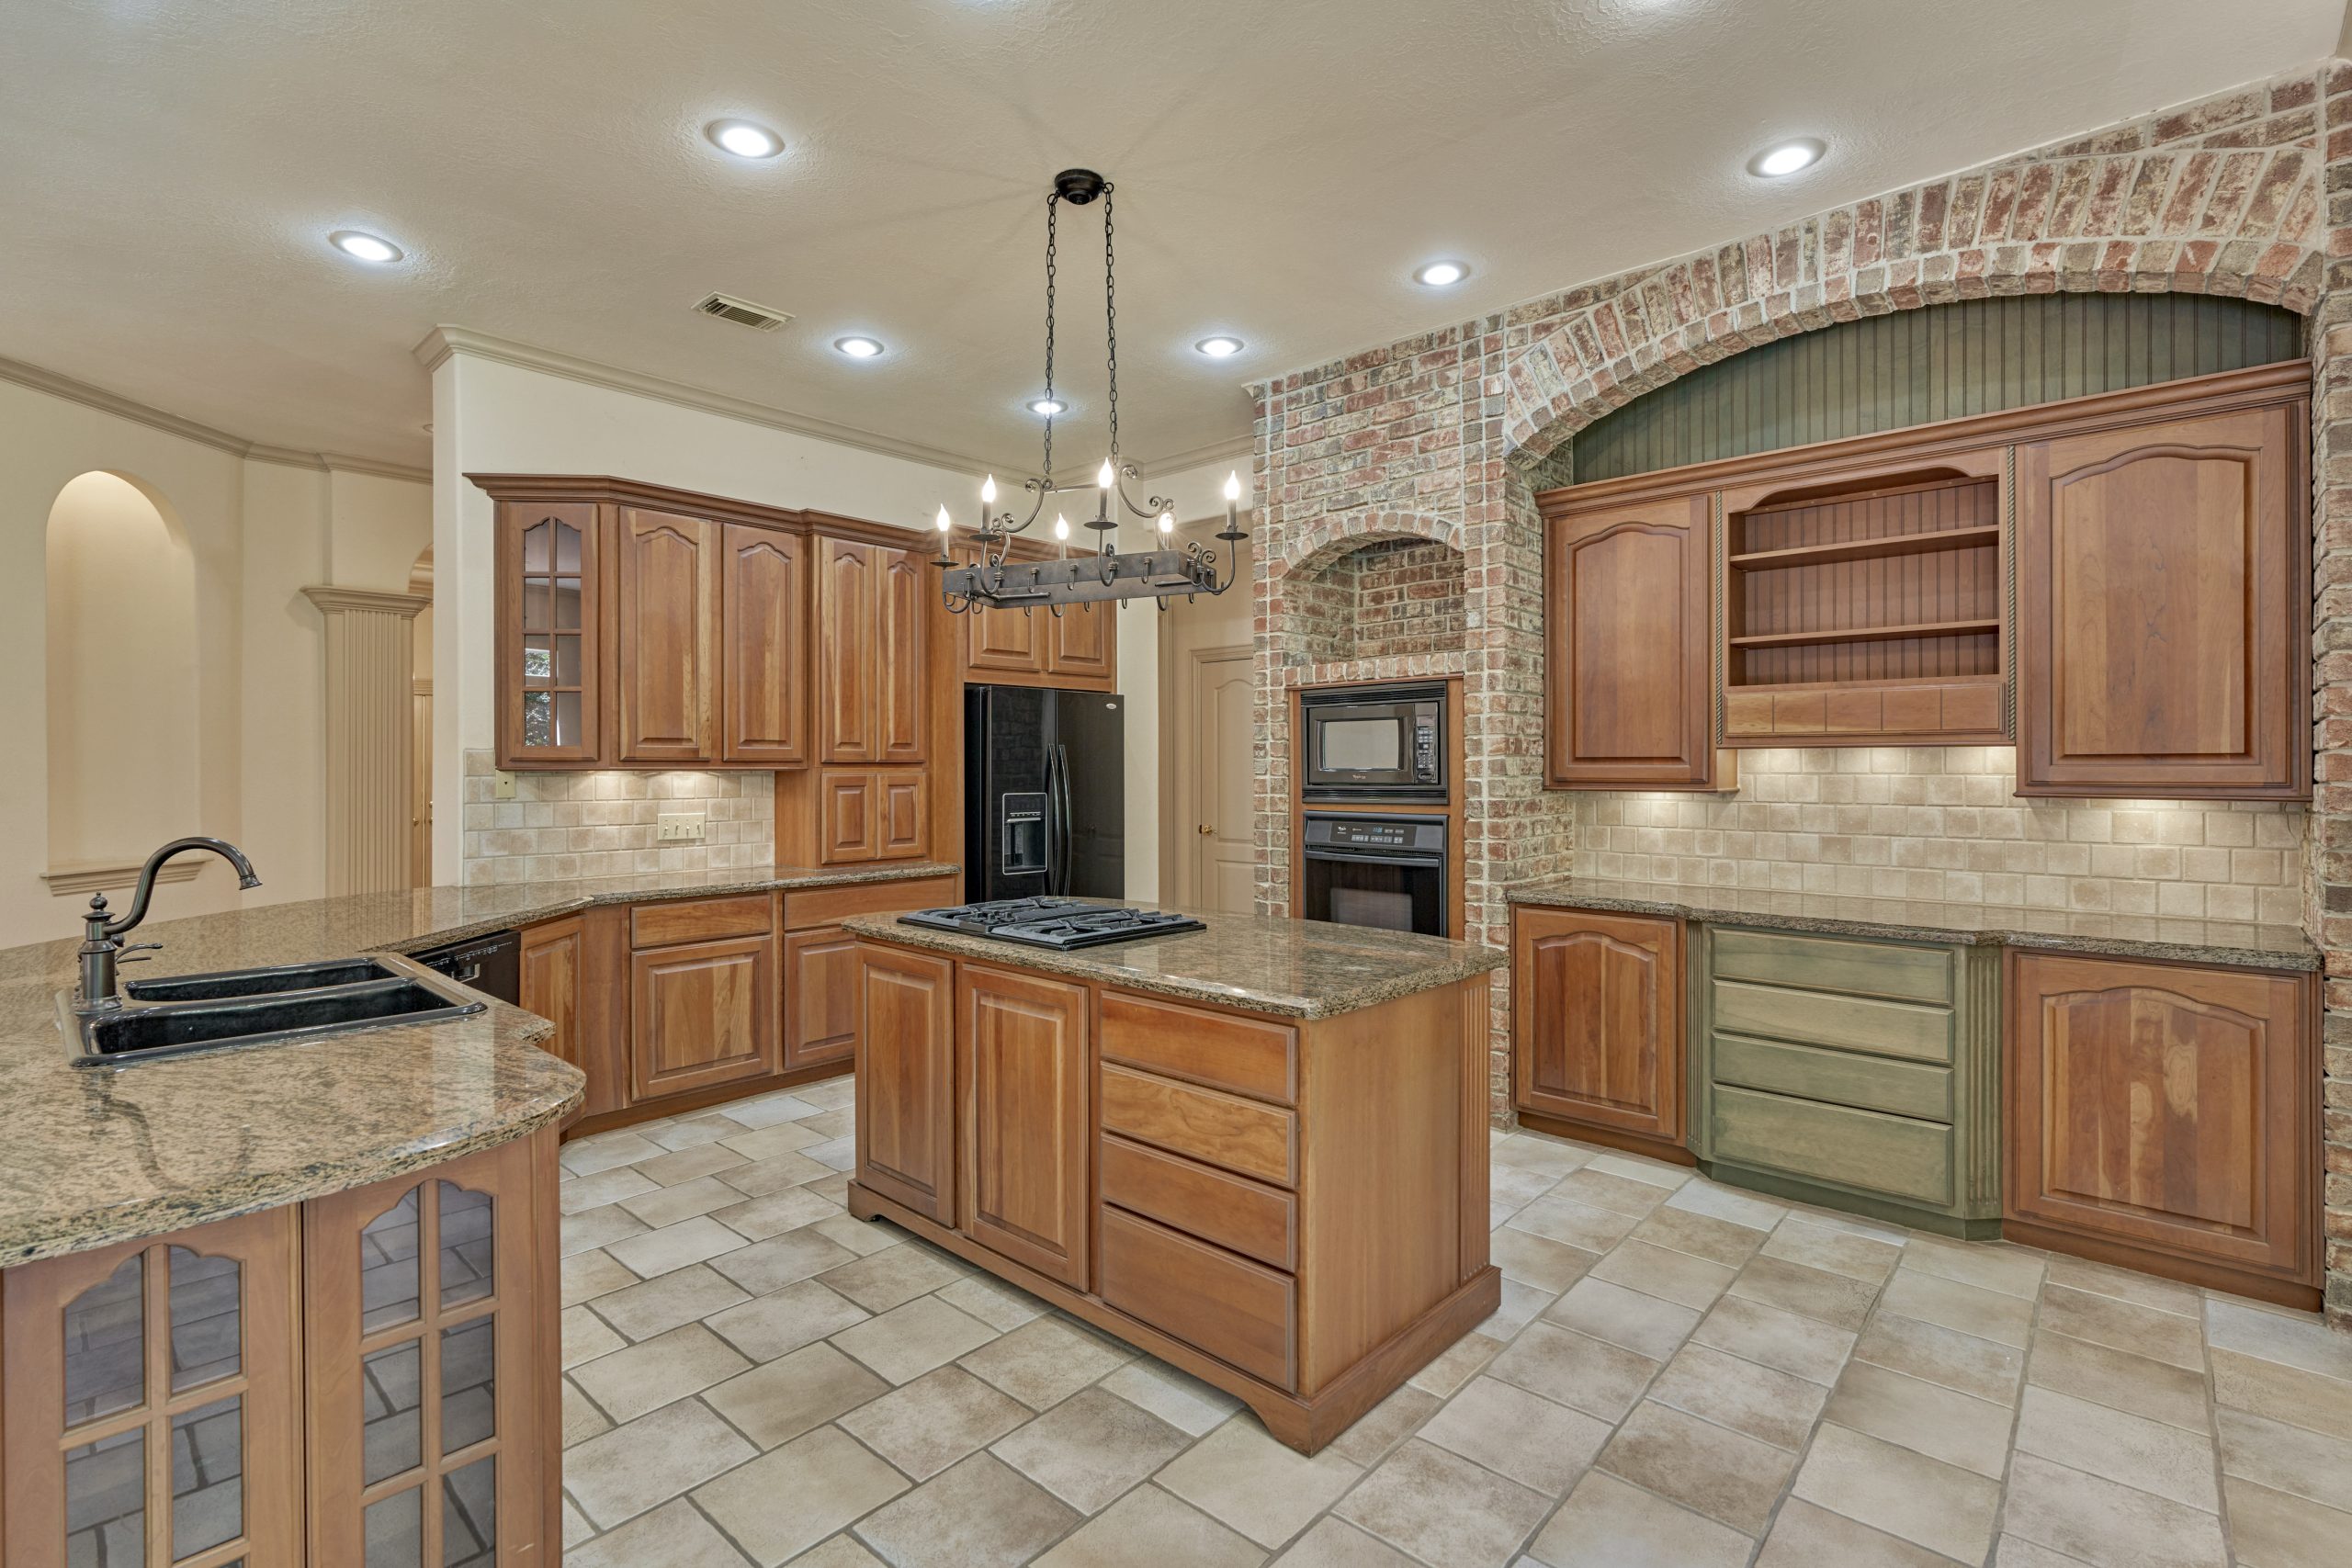 Real Estate Photo Edit: Residential Virtual Remodeling, Before Image